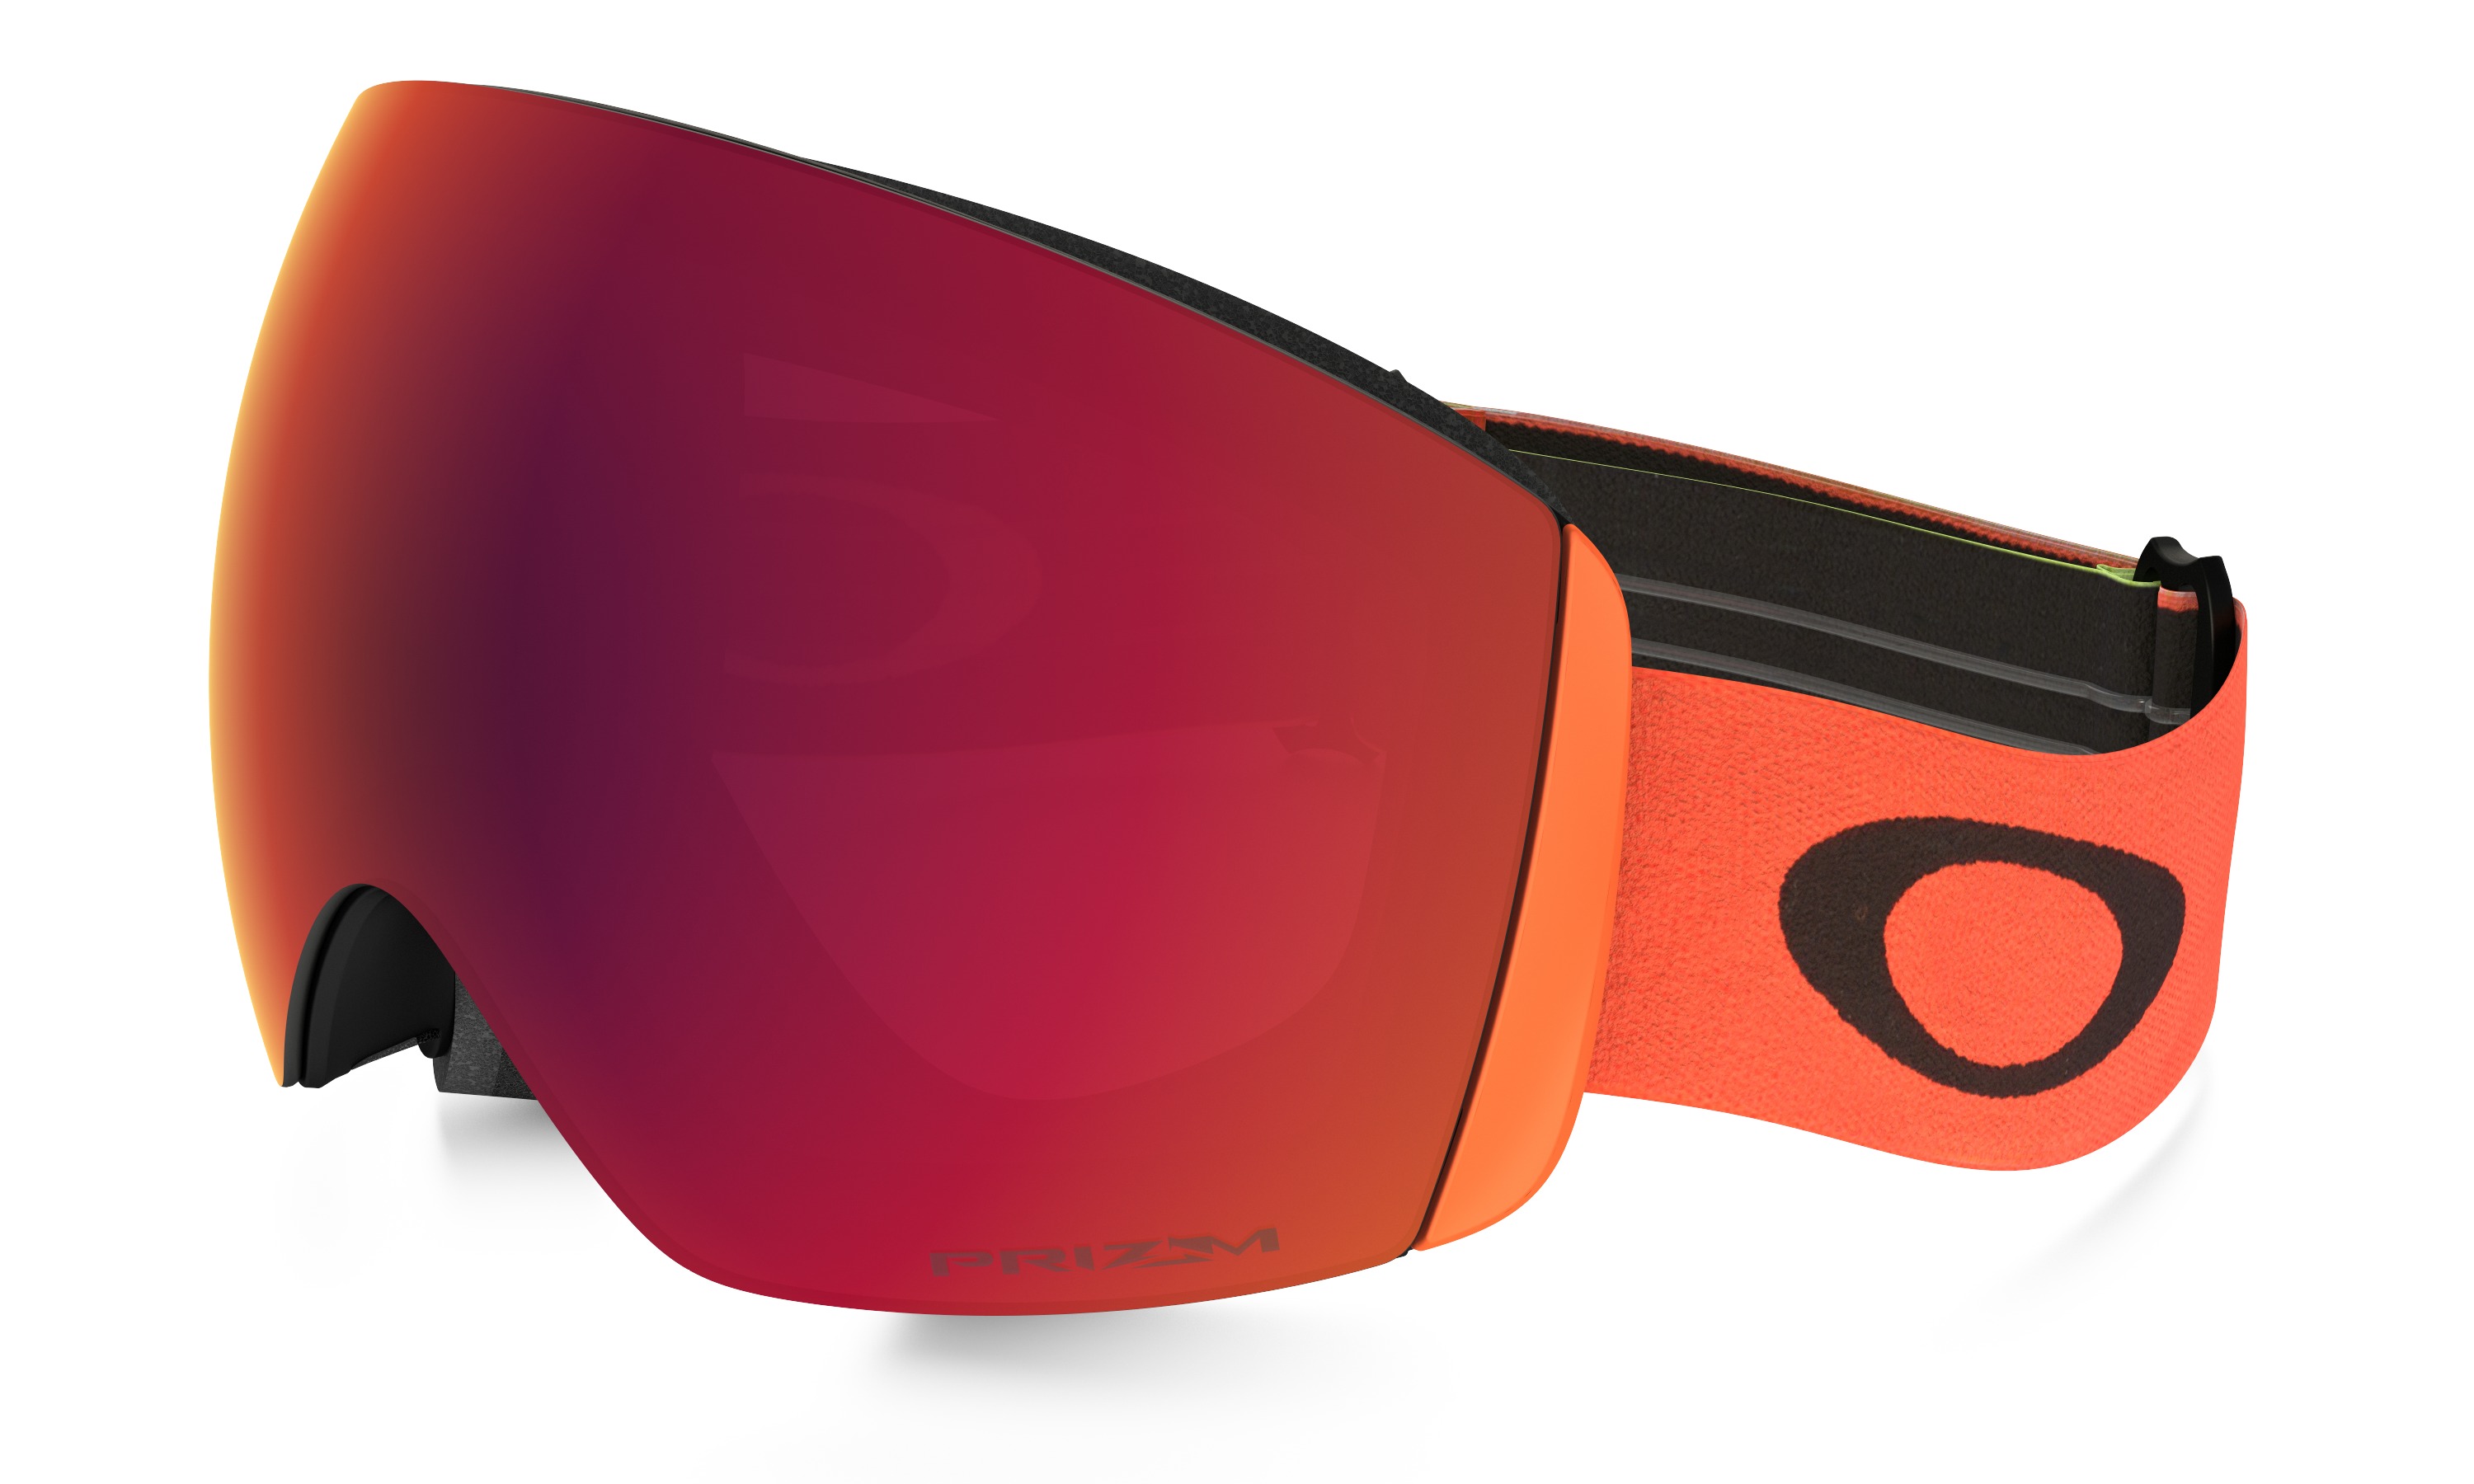 Those orange & yellow Oakley goggles from the Olympics... so hot right now  - FREESKIER